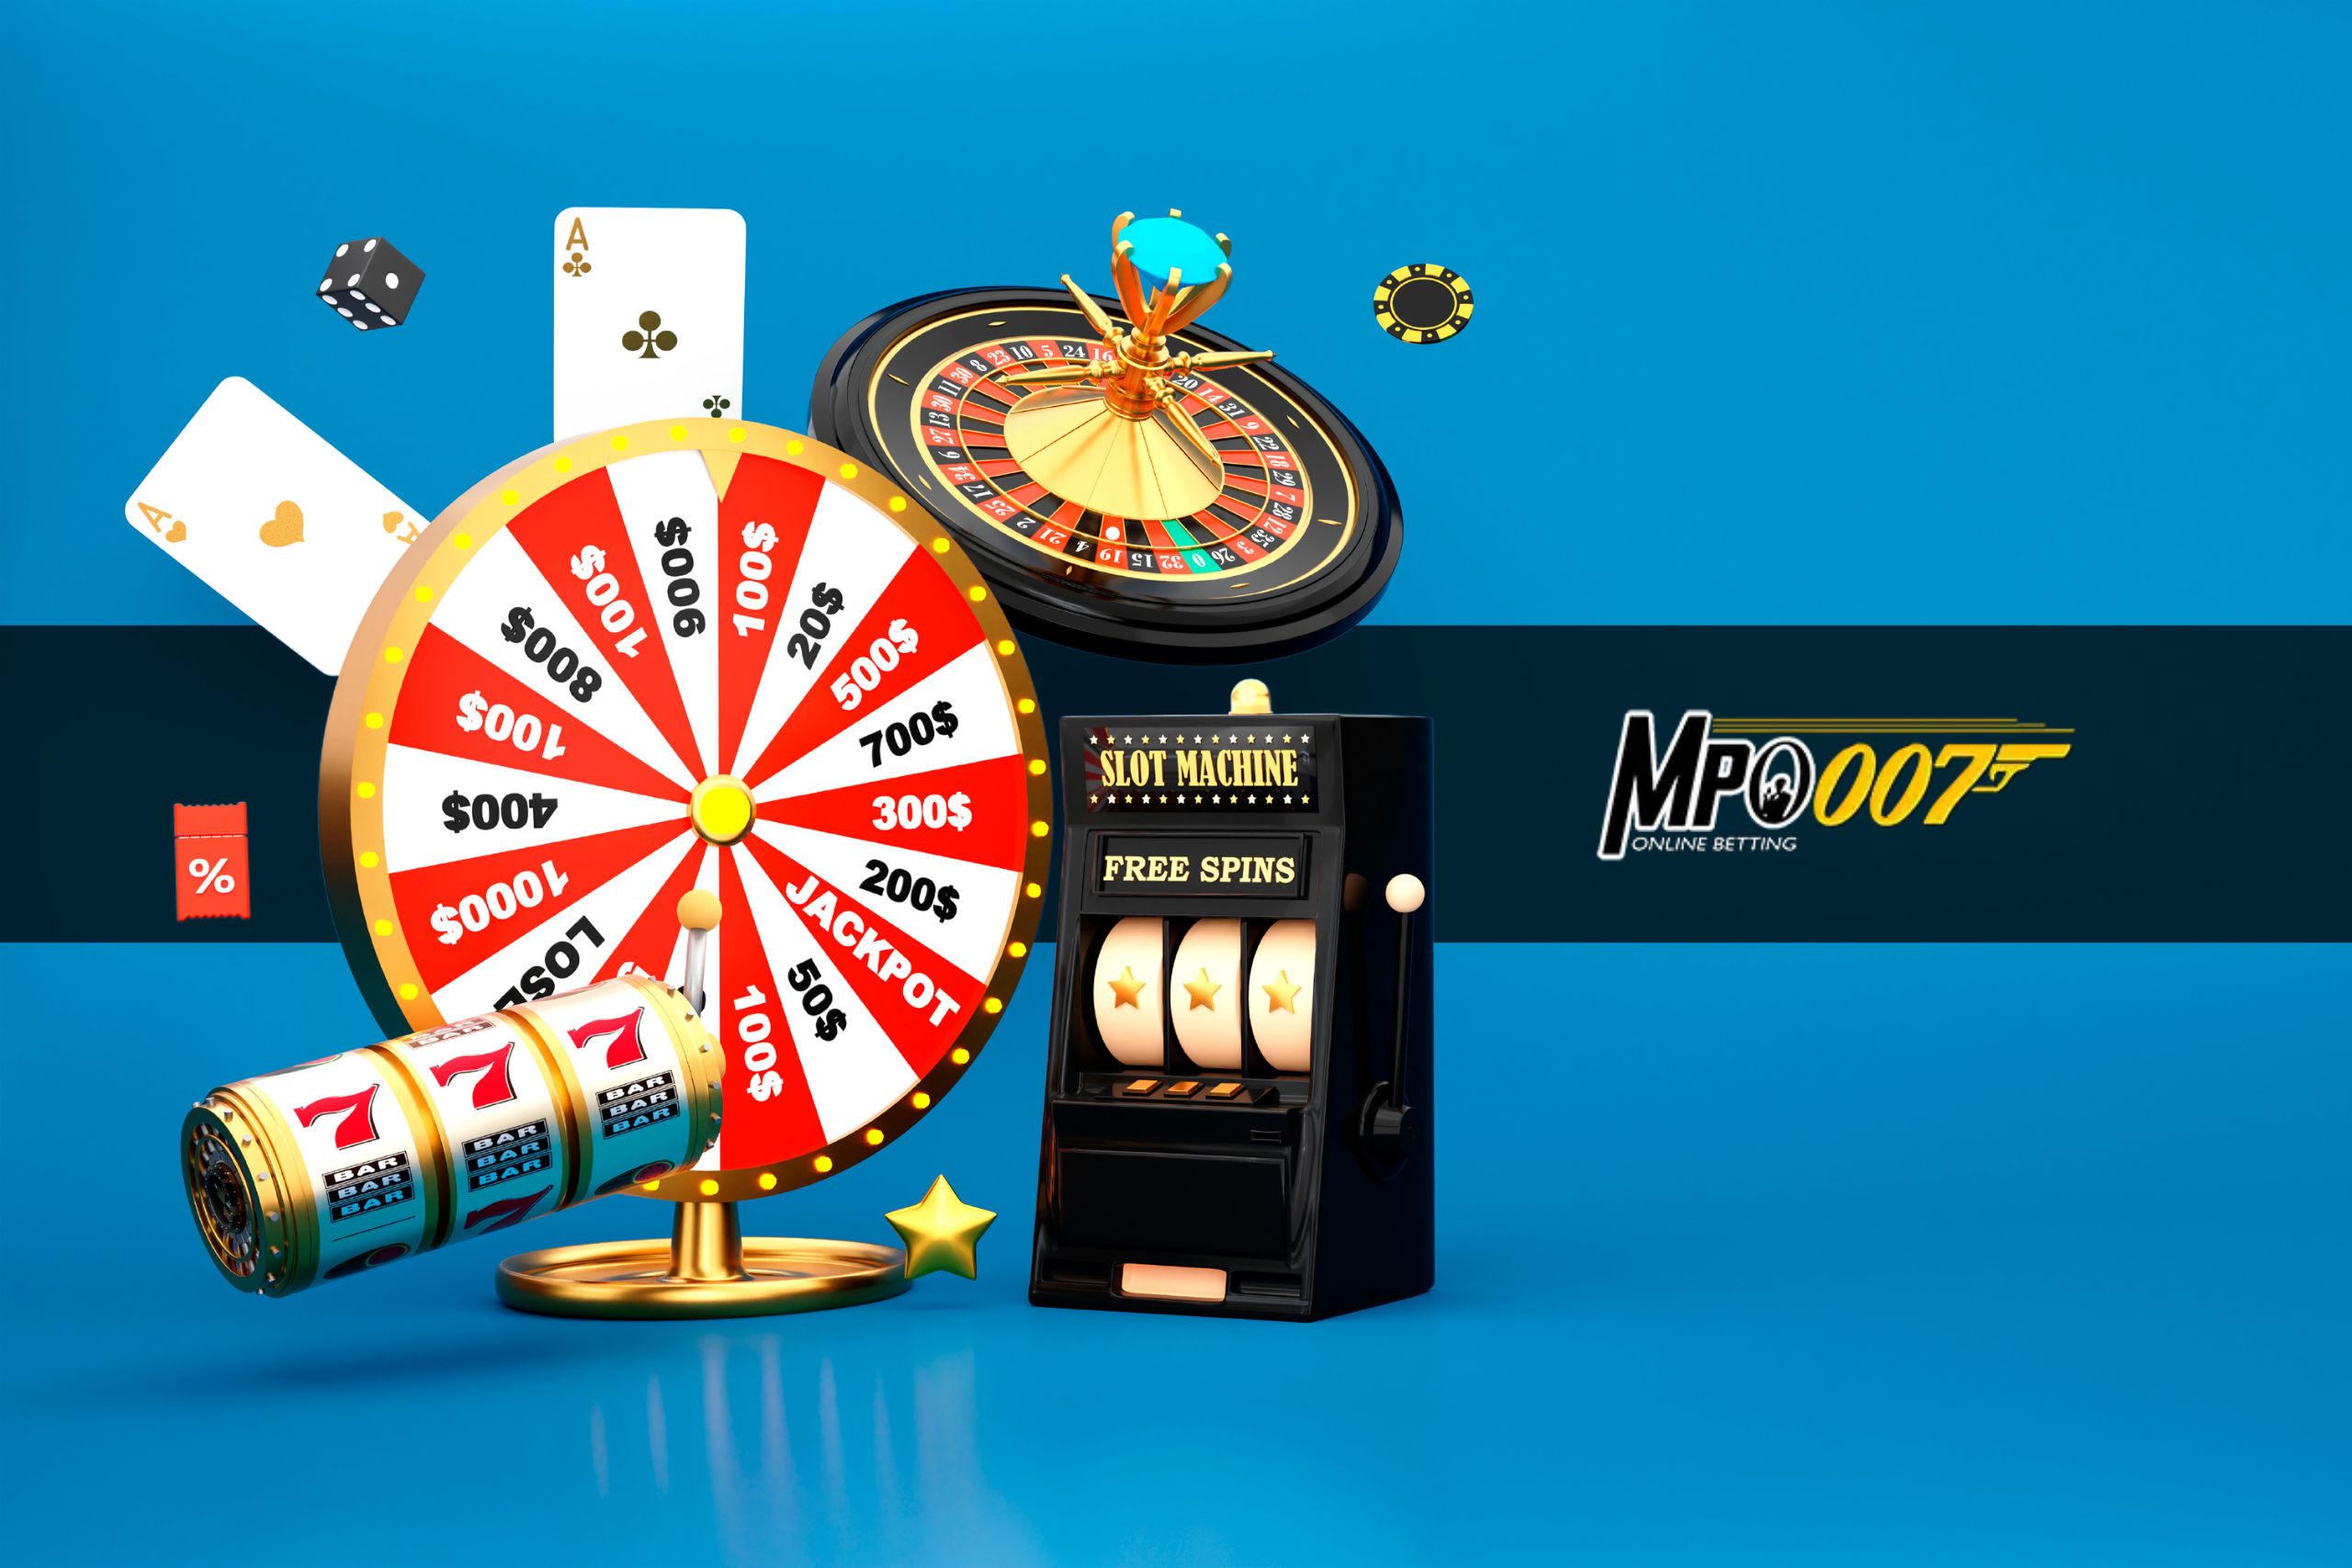 The Ultimate Guide To MPO007 Online Casino: Trusted Slot Website